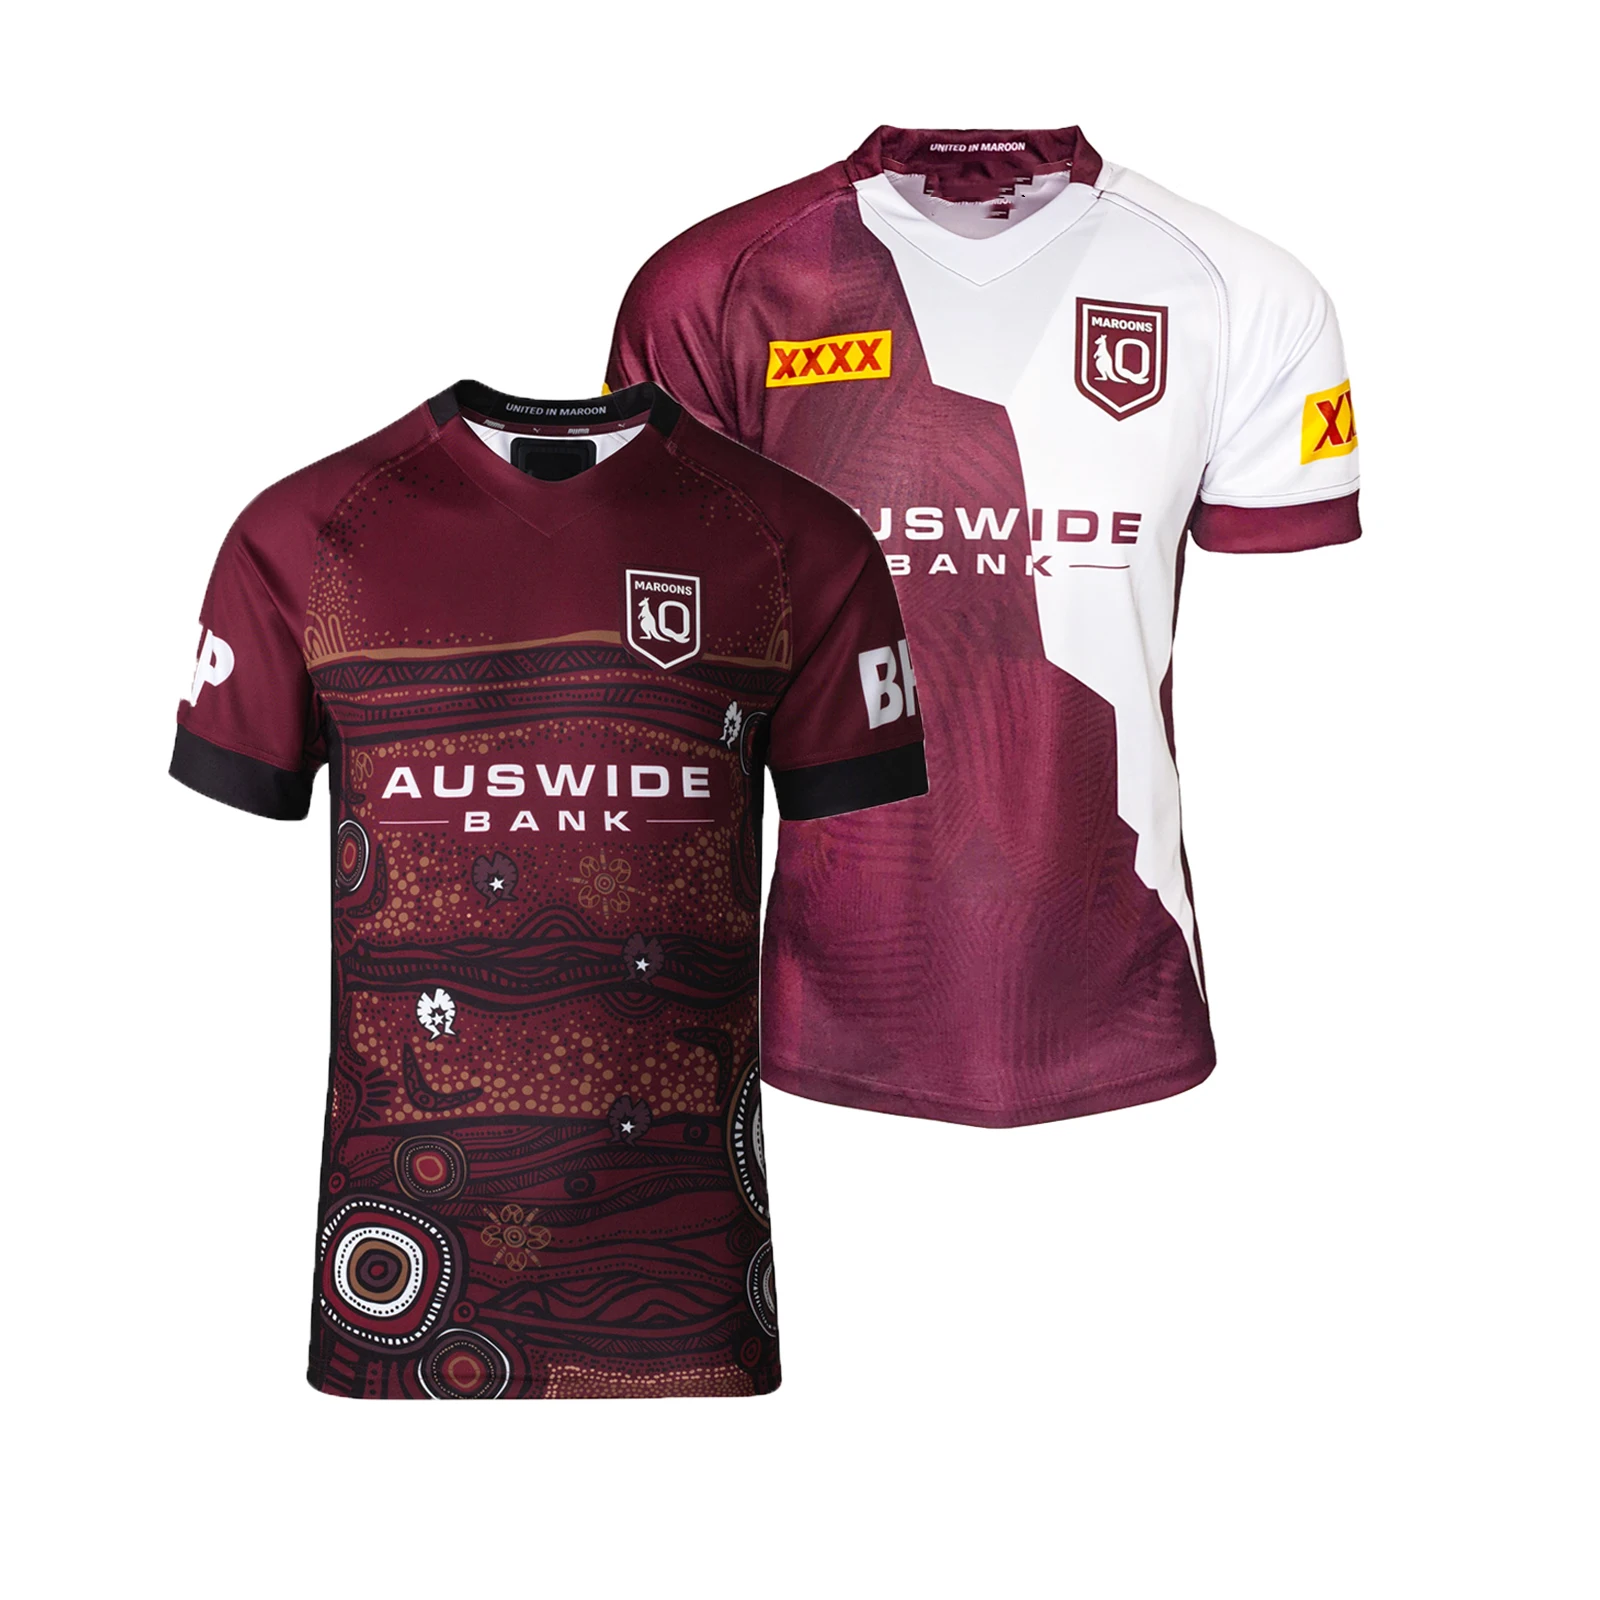 

2021 QUEENSLAND MAROONS STATE OF ORIGIN INDIGENOUS TRAINING/CAPTAINS RUN RUGBY JERSEY - MENS